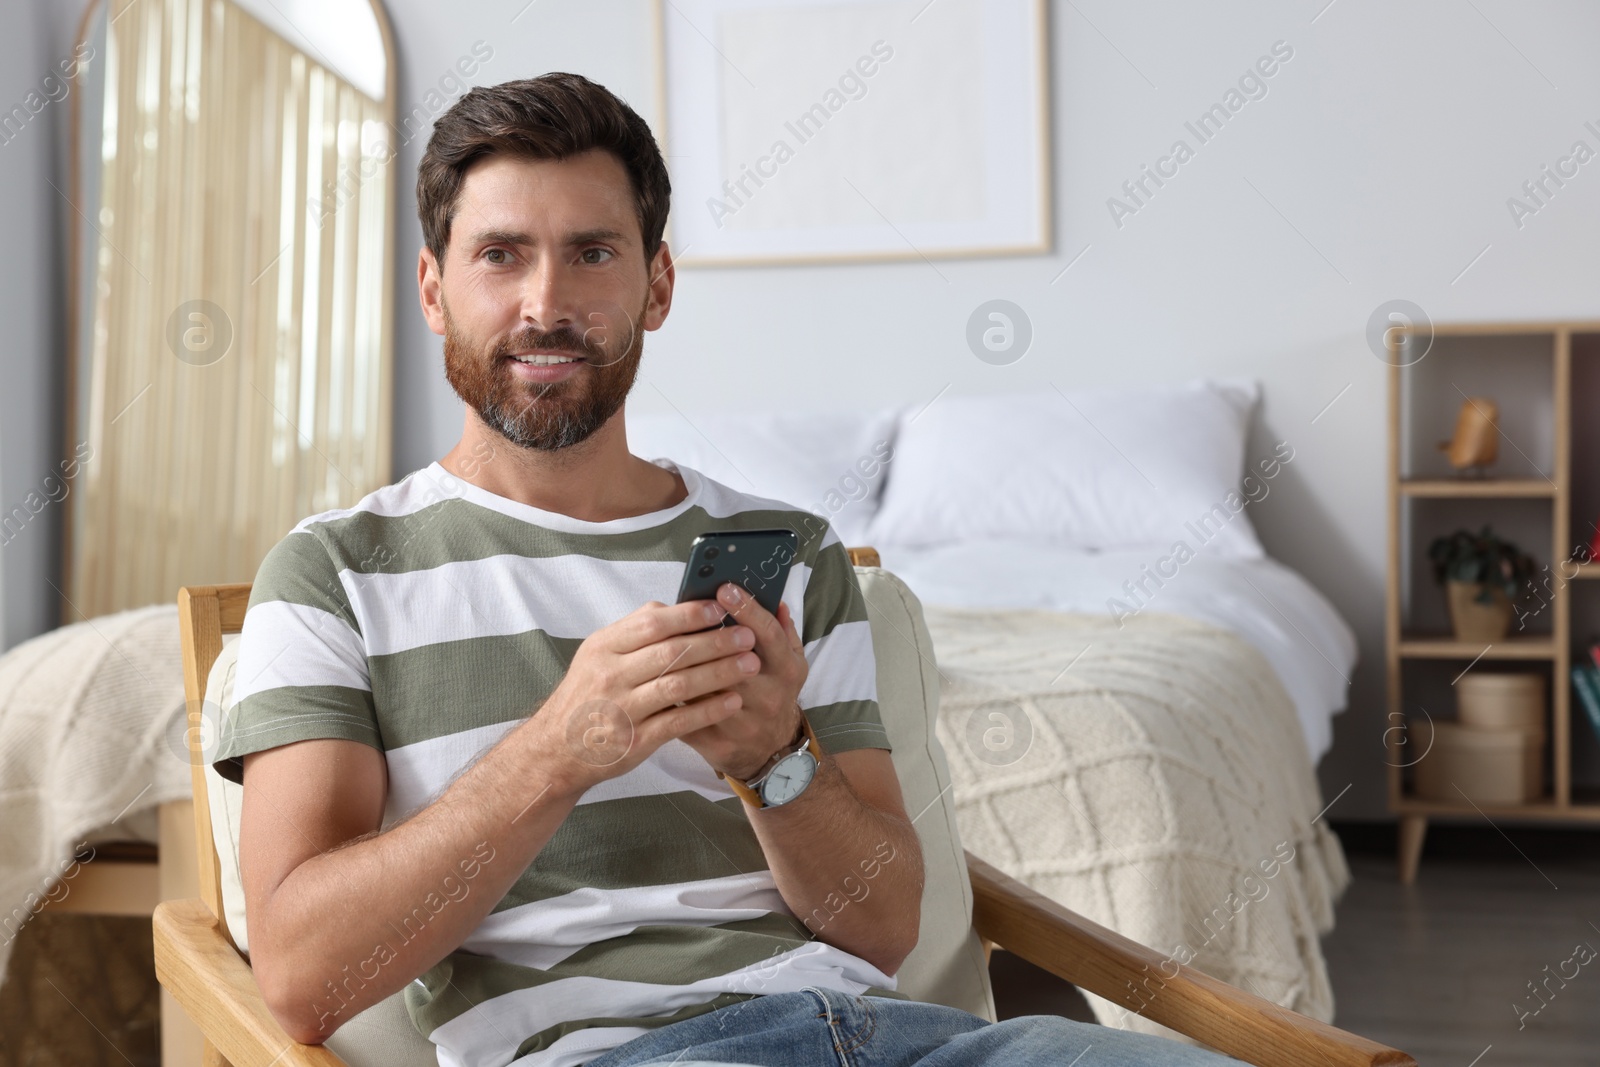 Photo of Handsome man using smartphone in bedroom, space for text